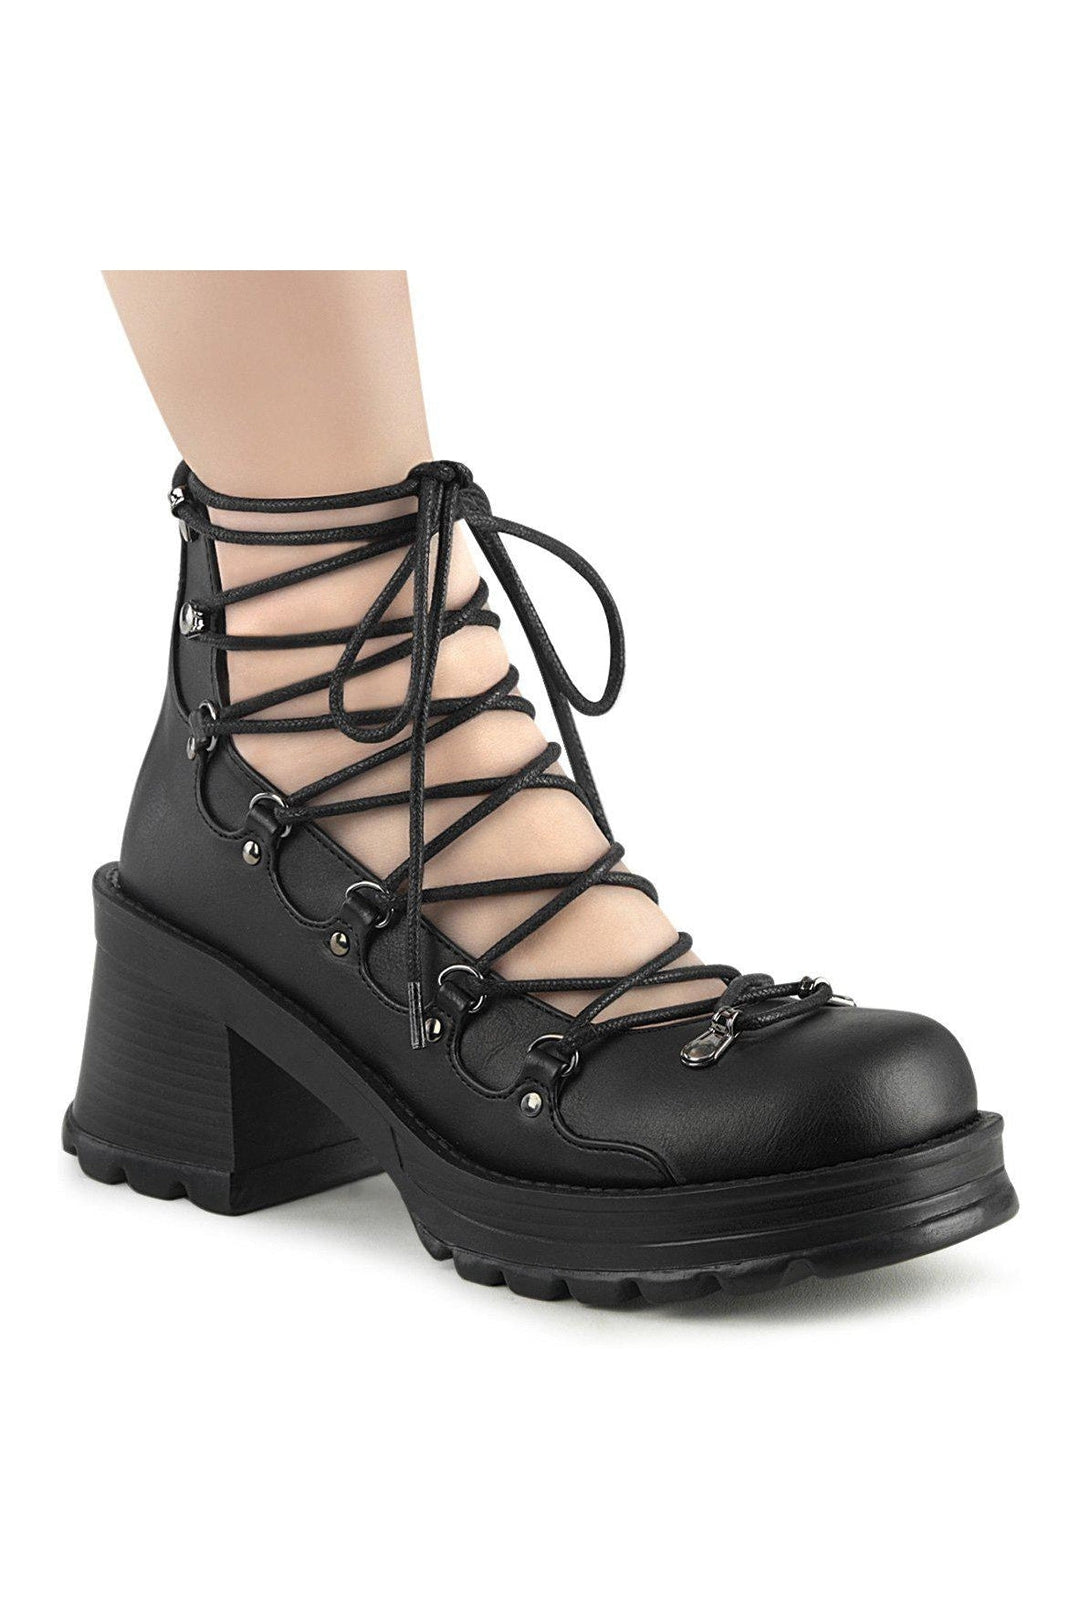 BRATTY-32 Ankle Boot | Black Faux Leather-Ankle Boots-Demonia-SEXYSHOES.COM